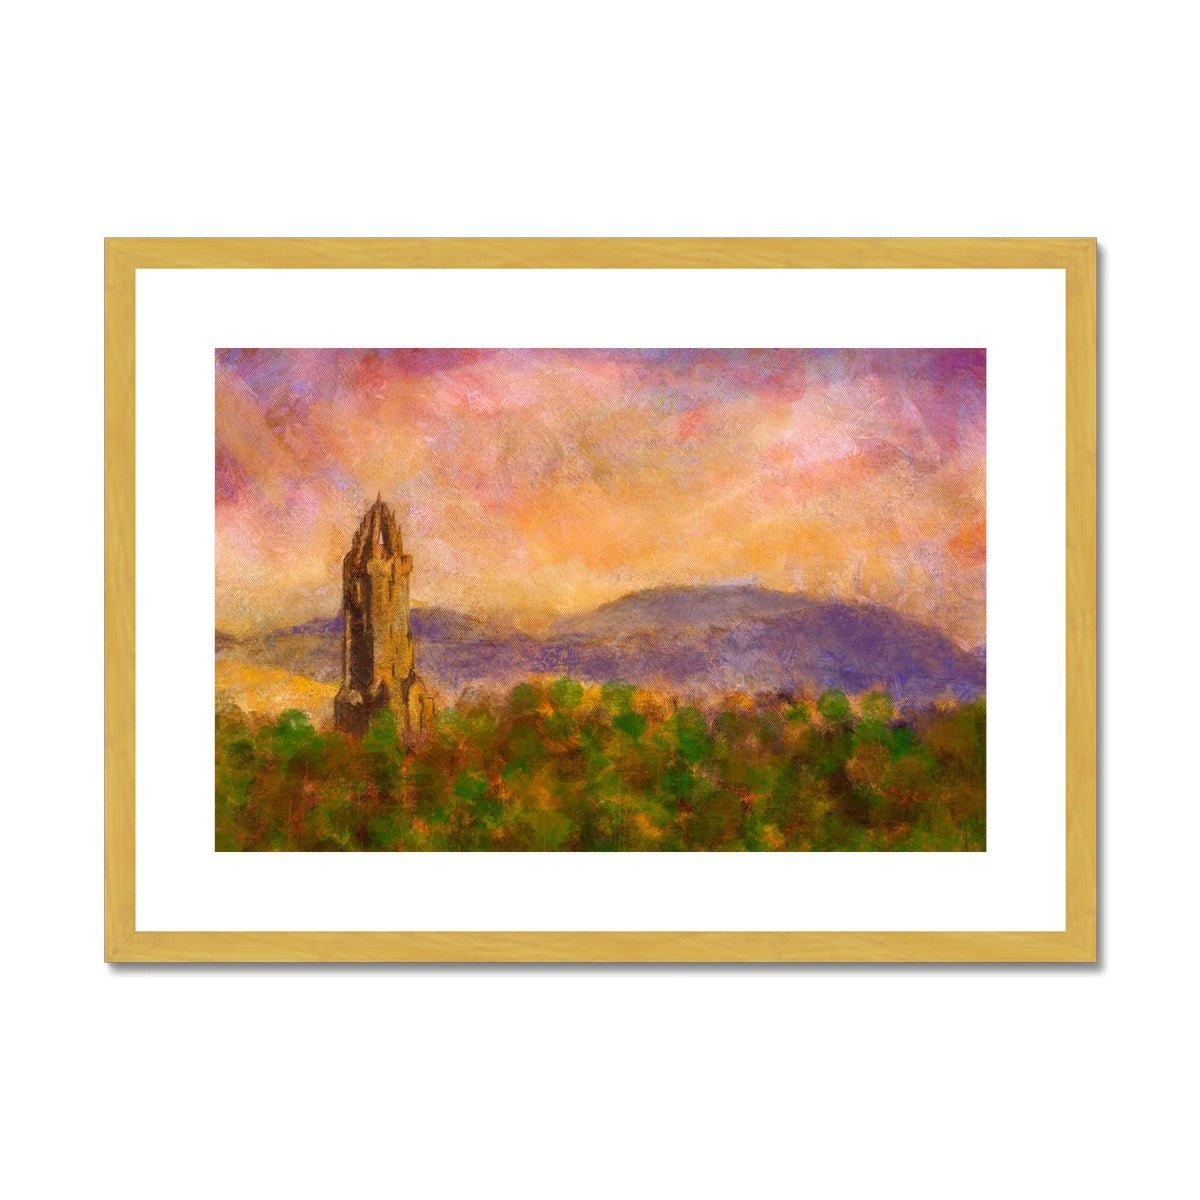 Wallace Monument Dusk Painting | Antique Framed & Mounted Prints From Scotland-Antique Framed & Mounted Prints-Historic & Iconic Scotland Art Gallery-A2 Landscape-Gold Frame-Paintings, Prints, Homeware, Art Gifts From Scotland By Scottish Artist Kevin Hunter